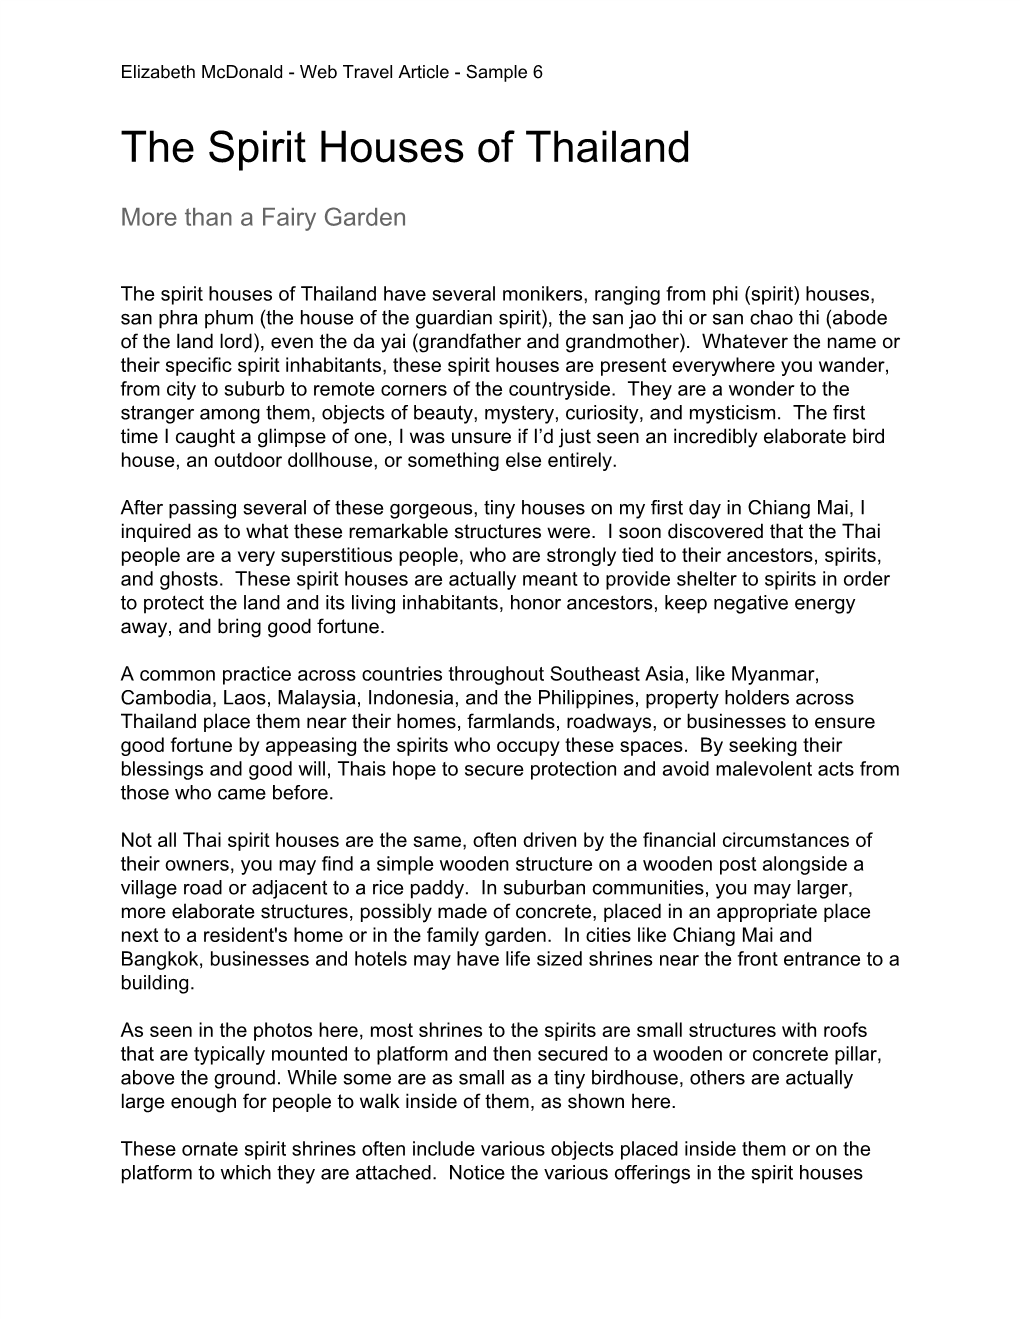 The Spirit Houses of Thailand